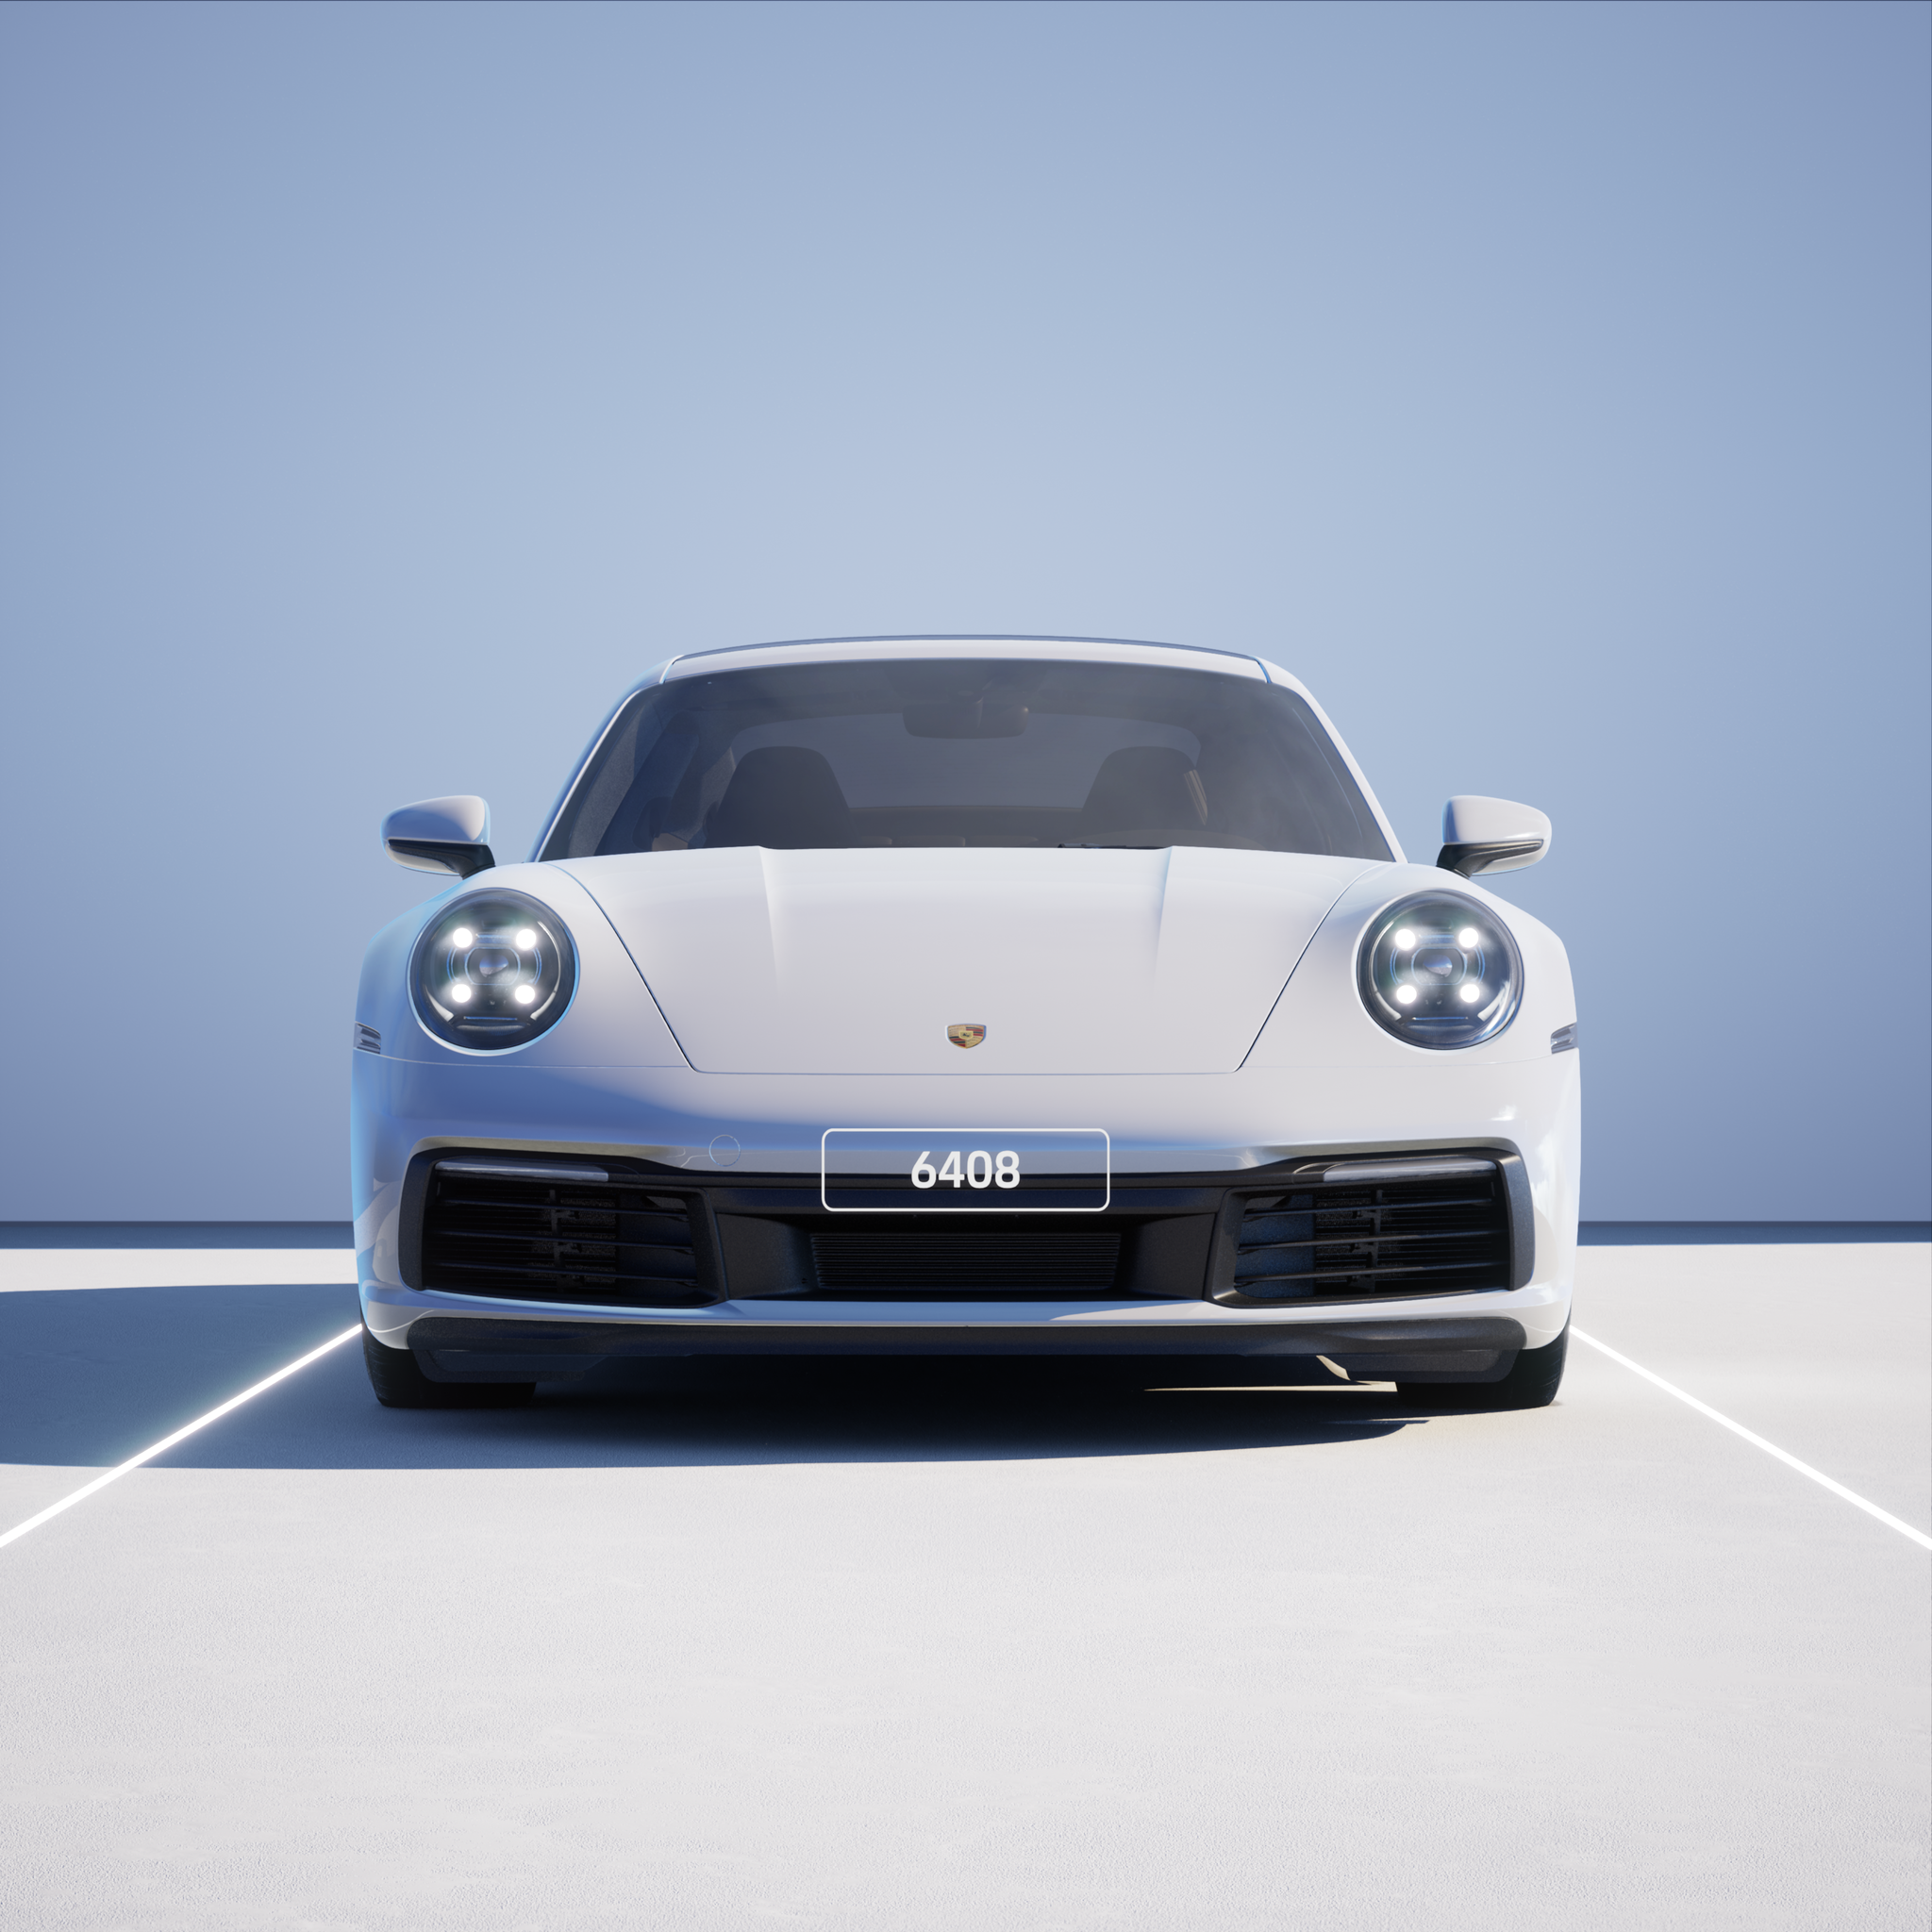 The PORSCHΞ 911 6408 image in phase